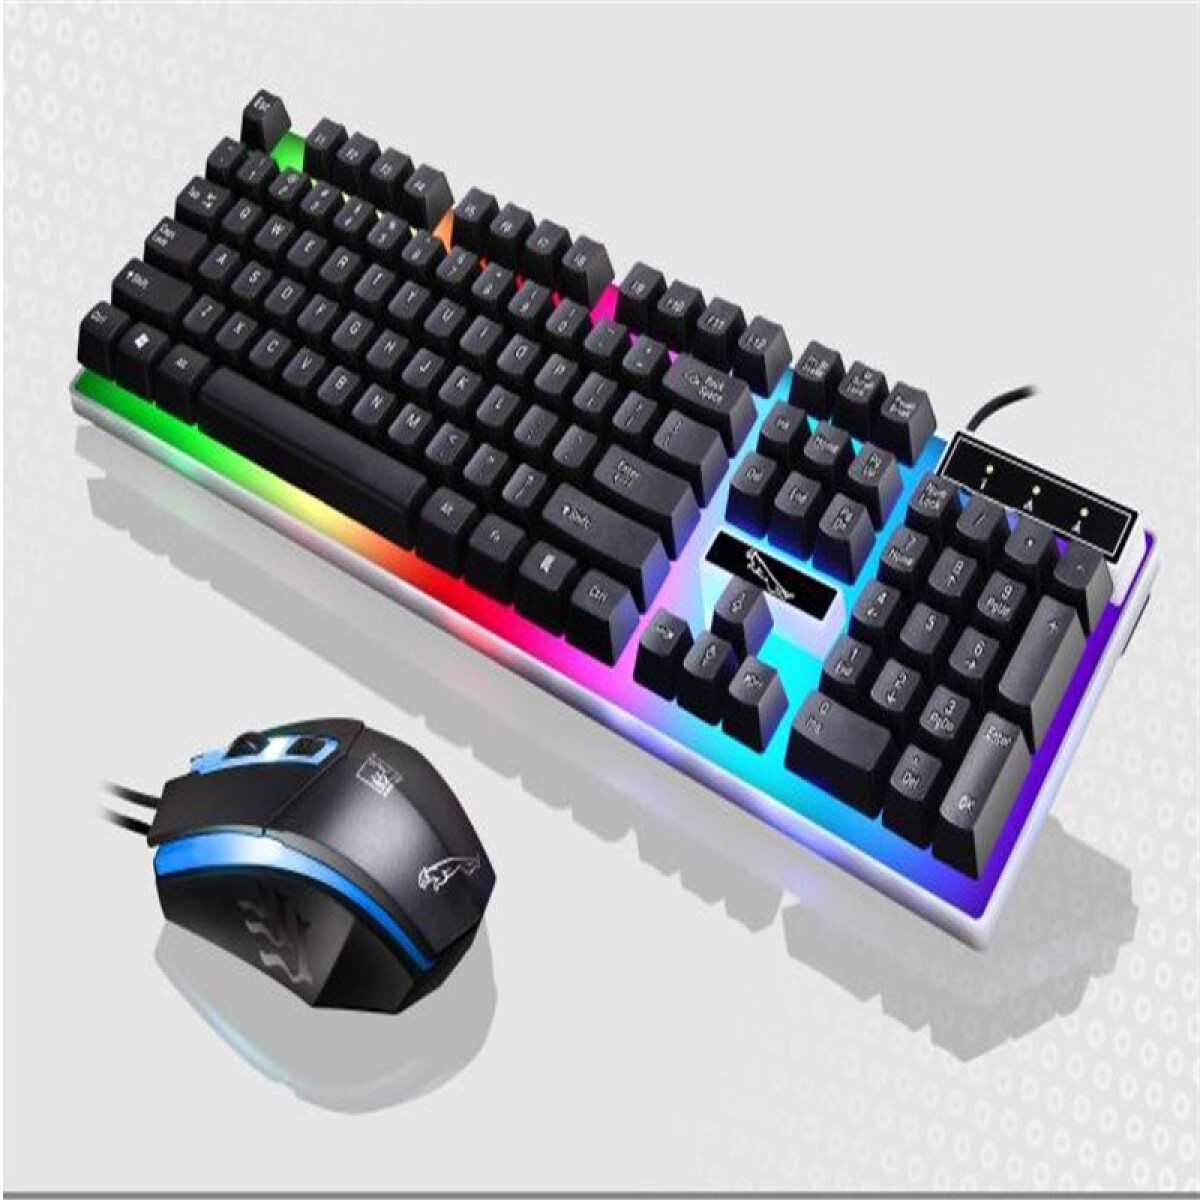 Combo Teclado y Mouse Gamer con Luces Led - 001 